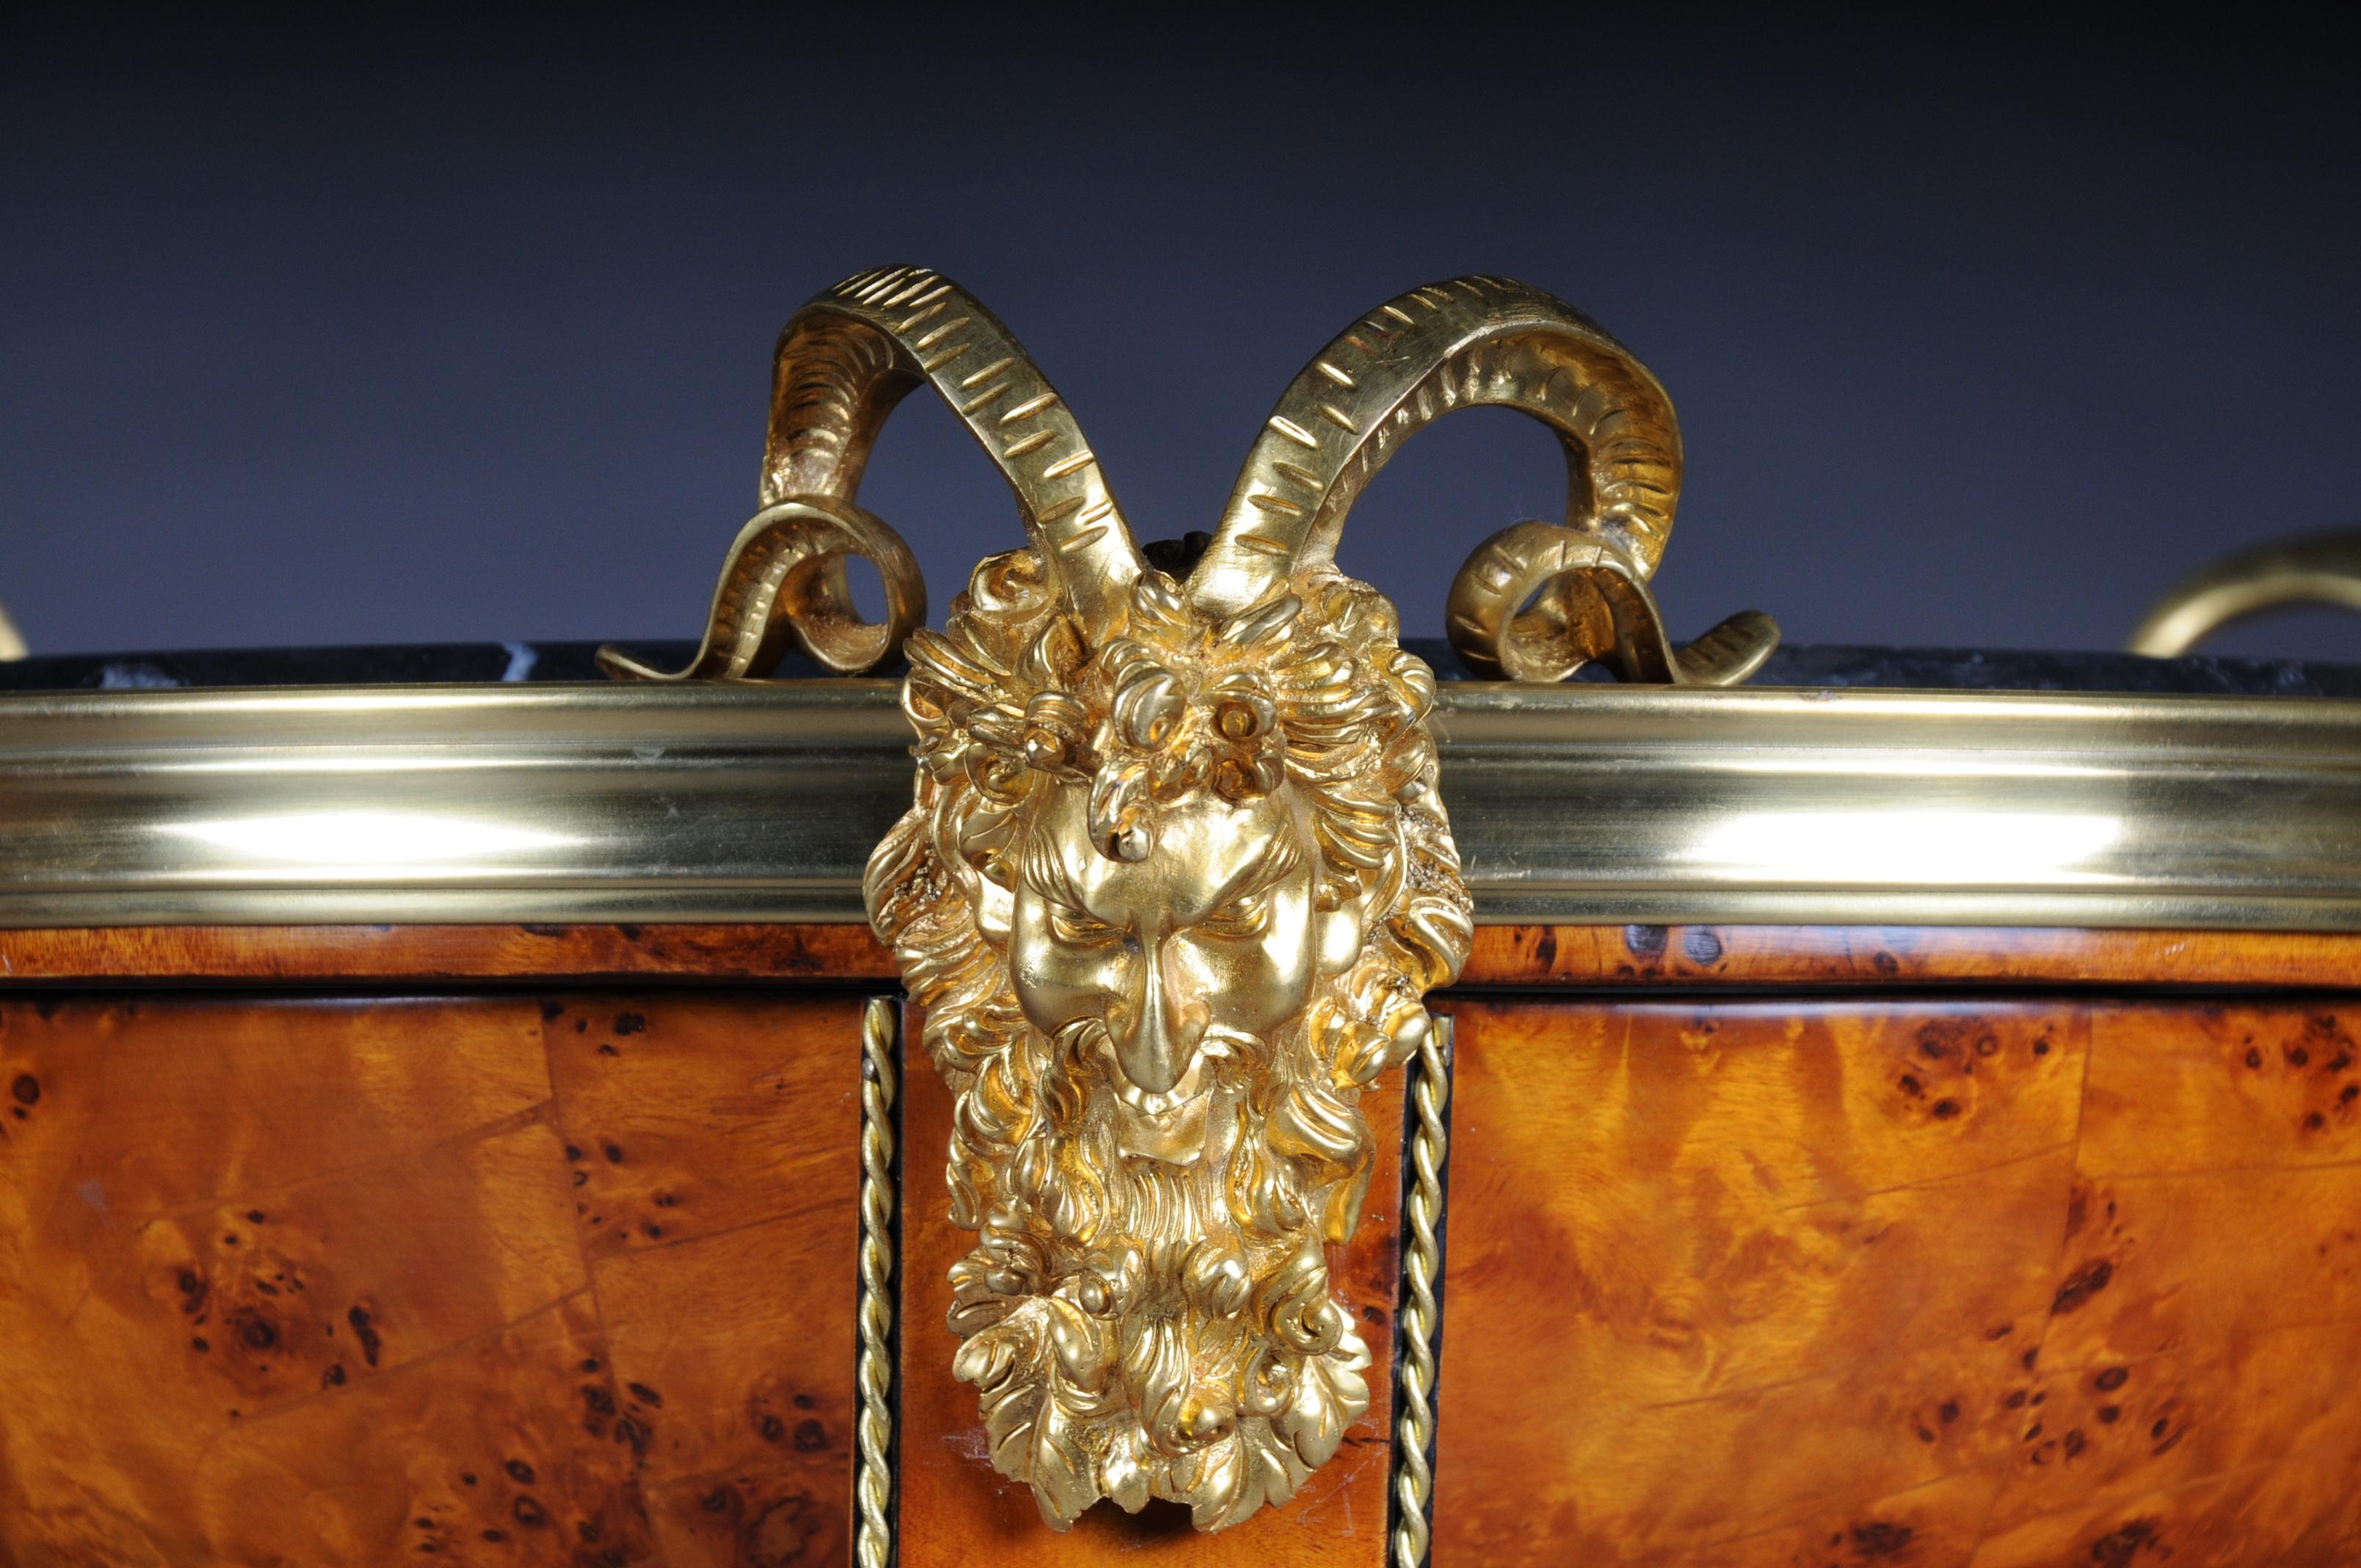 Maple root veneer on solid wood. Hemisphere with marble slab on satyr mask with tapered curly square legs in bronze lion paws ending on base plate retracted on three sides. The fittings are pronounced and of exceptionally good quality
Honey-colored